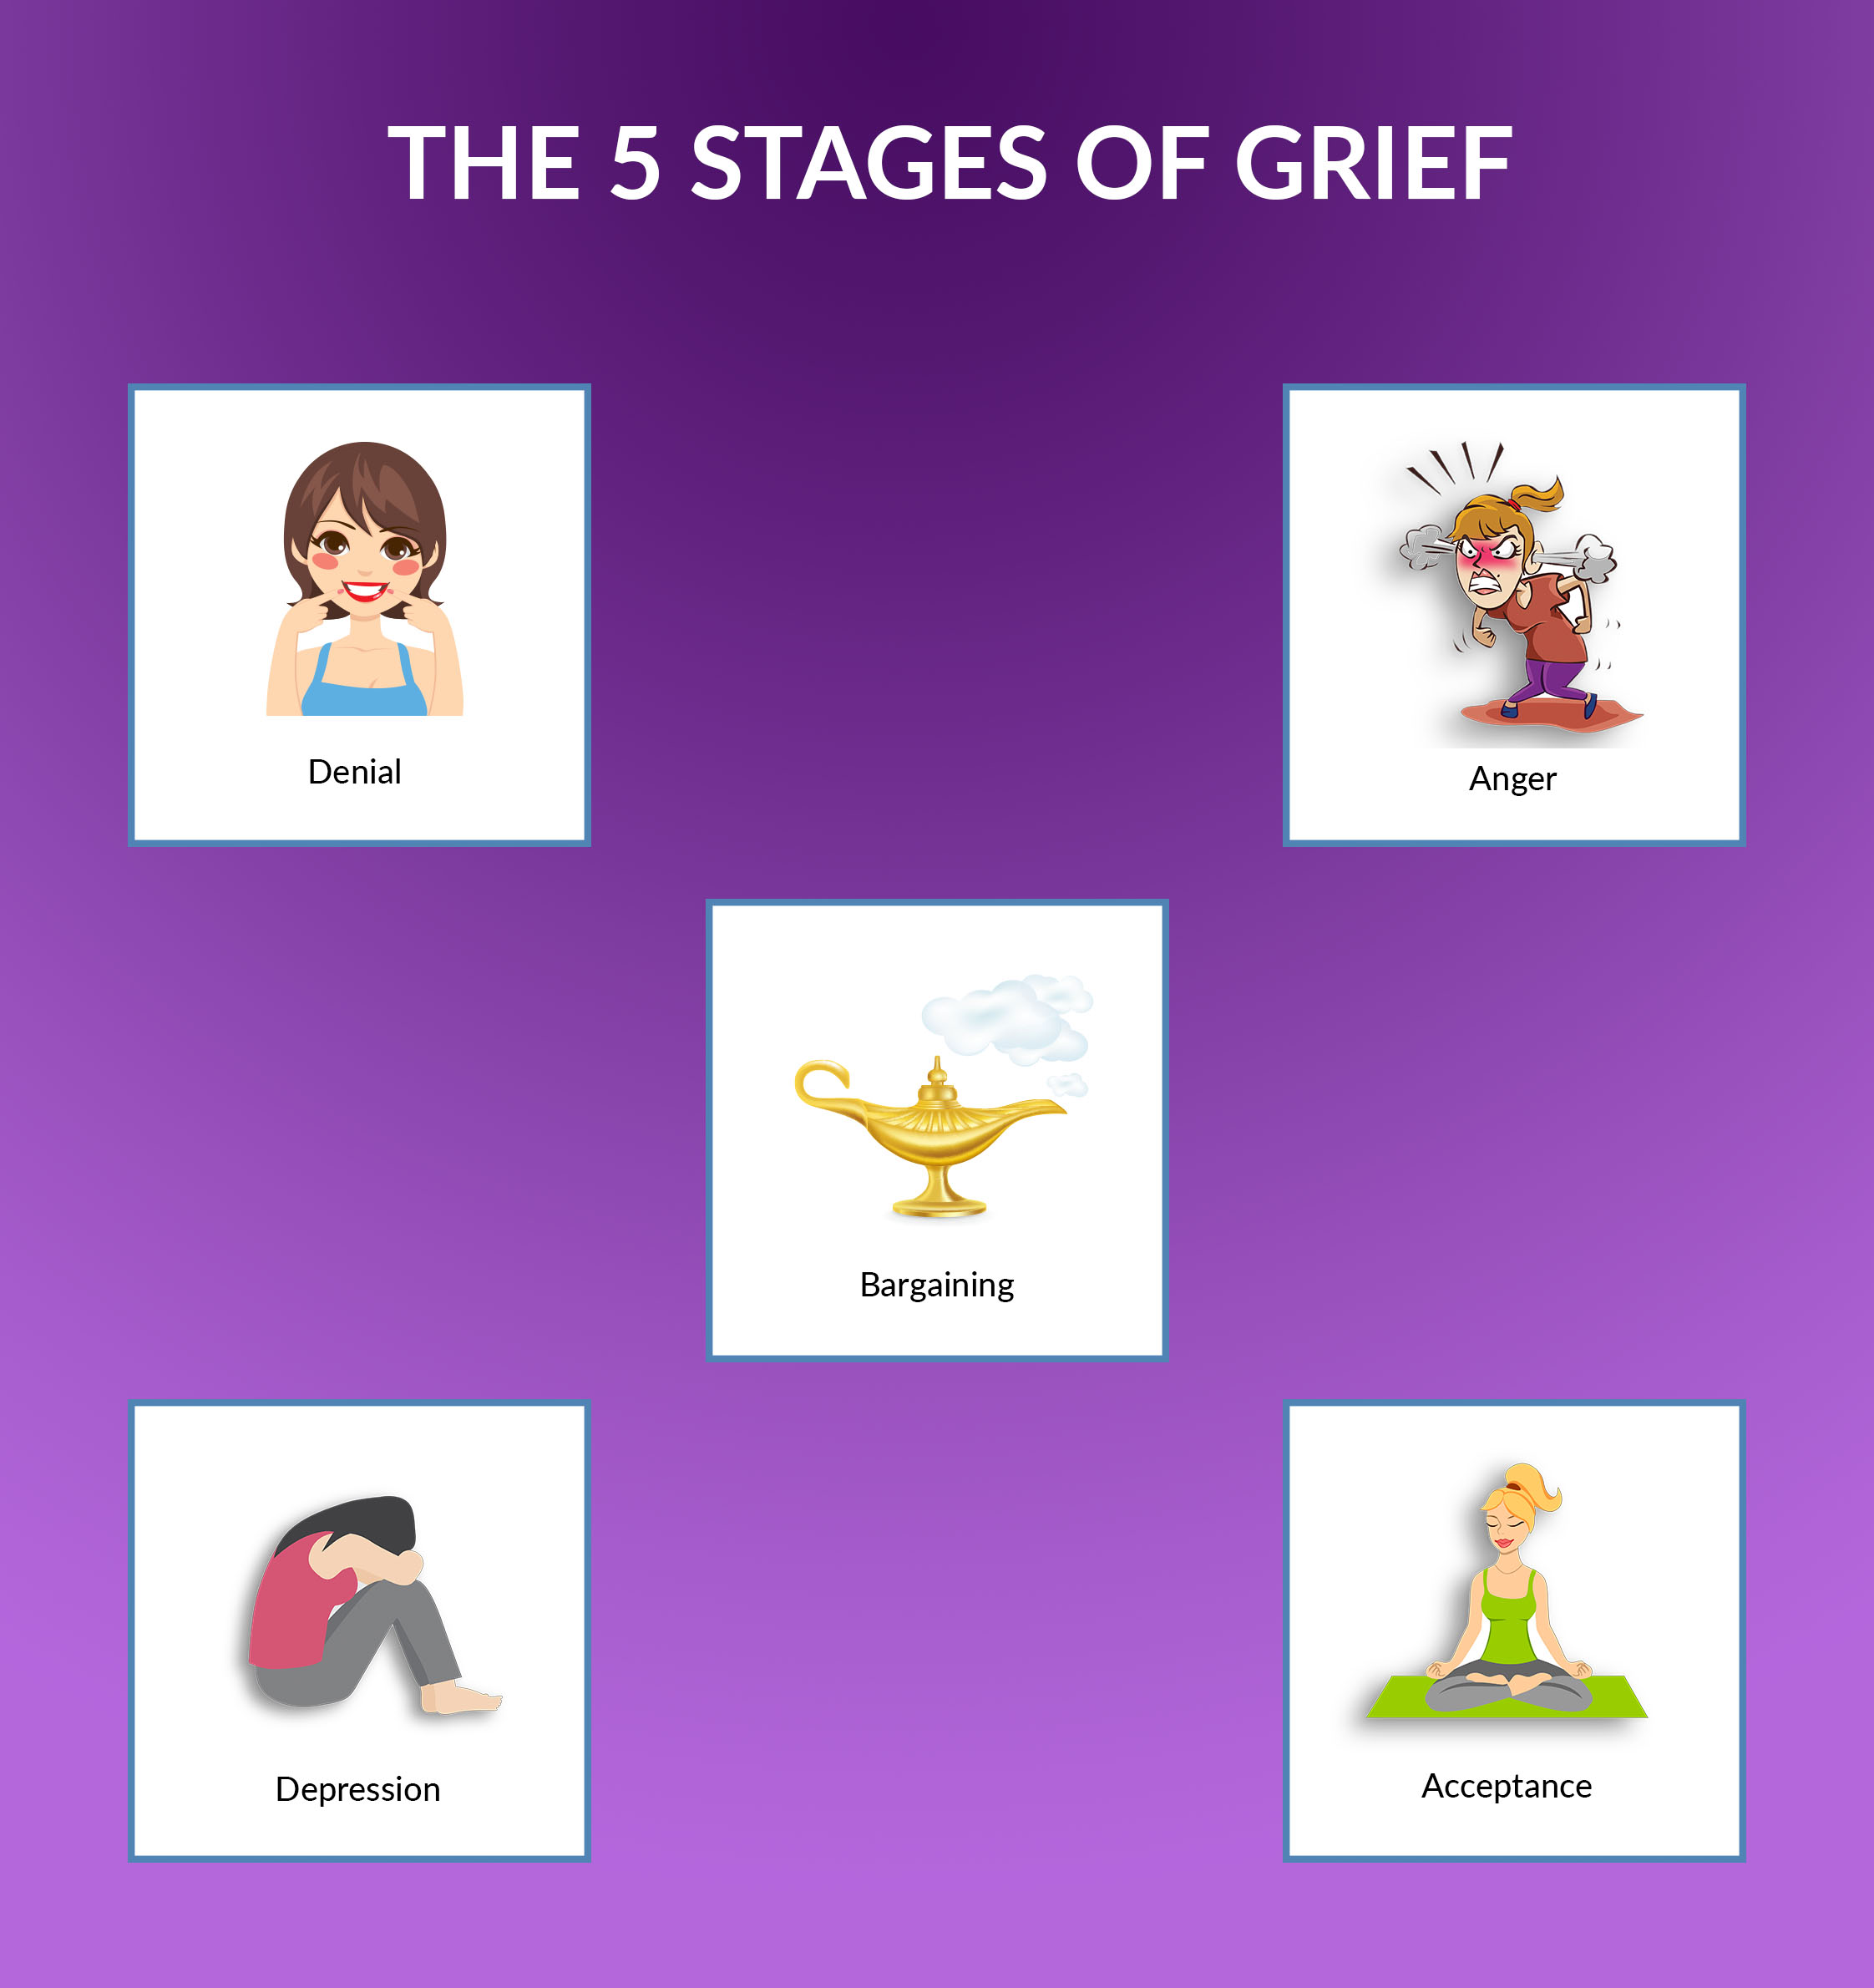 The 5 stages of the grieving process